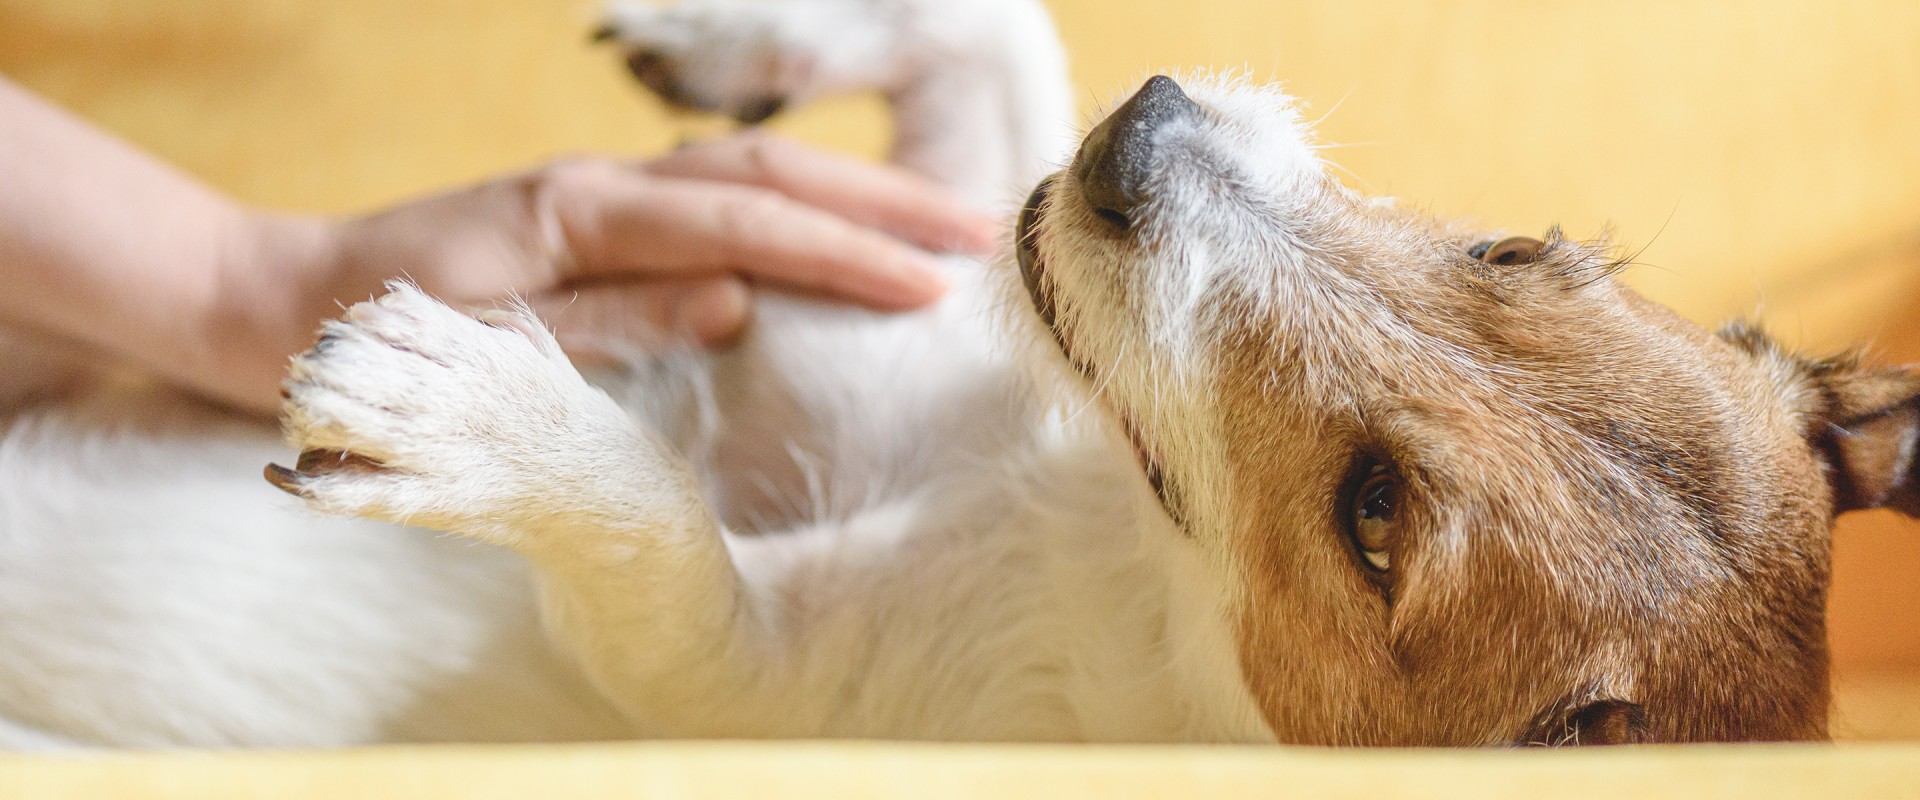 The Top Health Problems Among Dogs and How to Identify Them